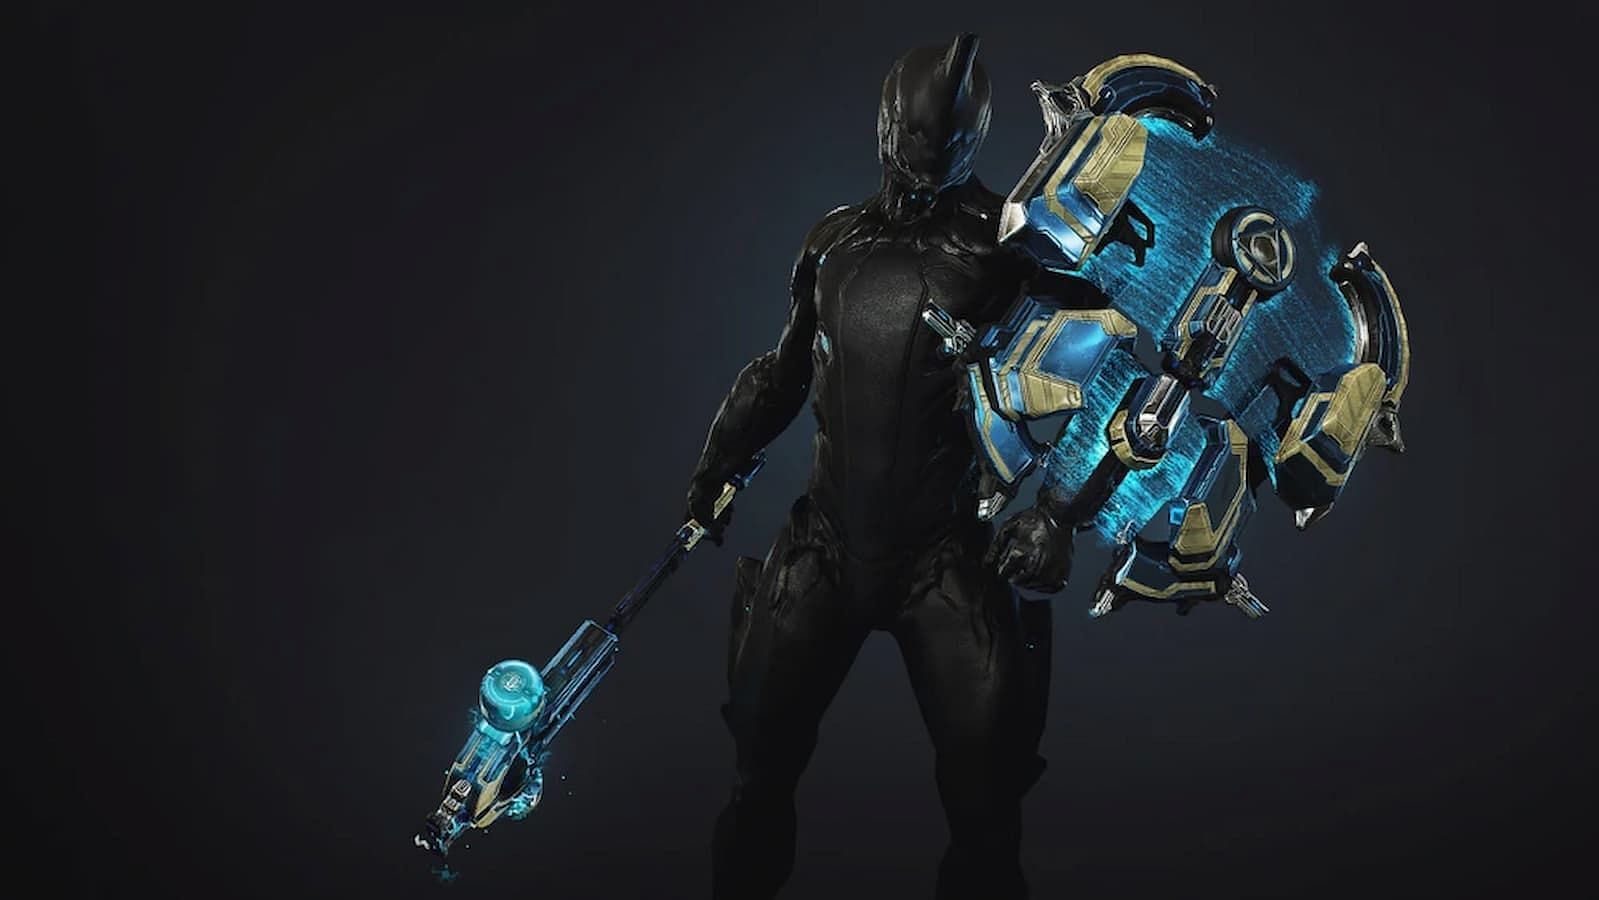 Many will be surprised to see Agendus this far up (Image via Digital Extremes)